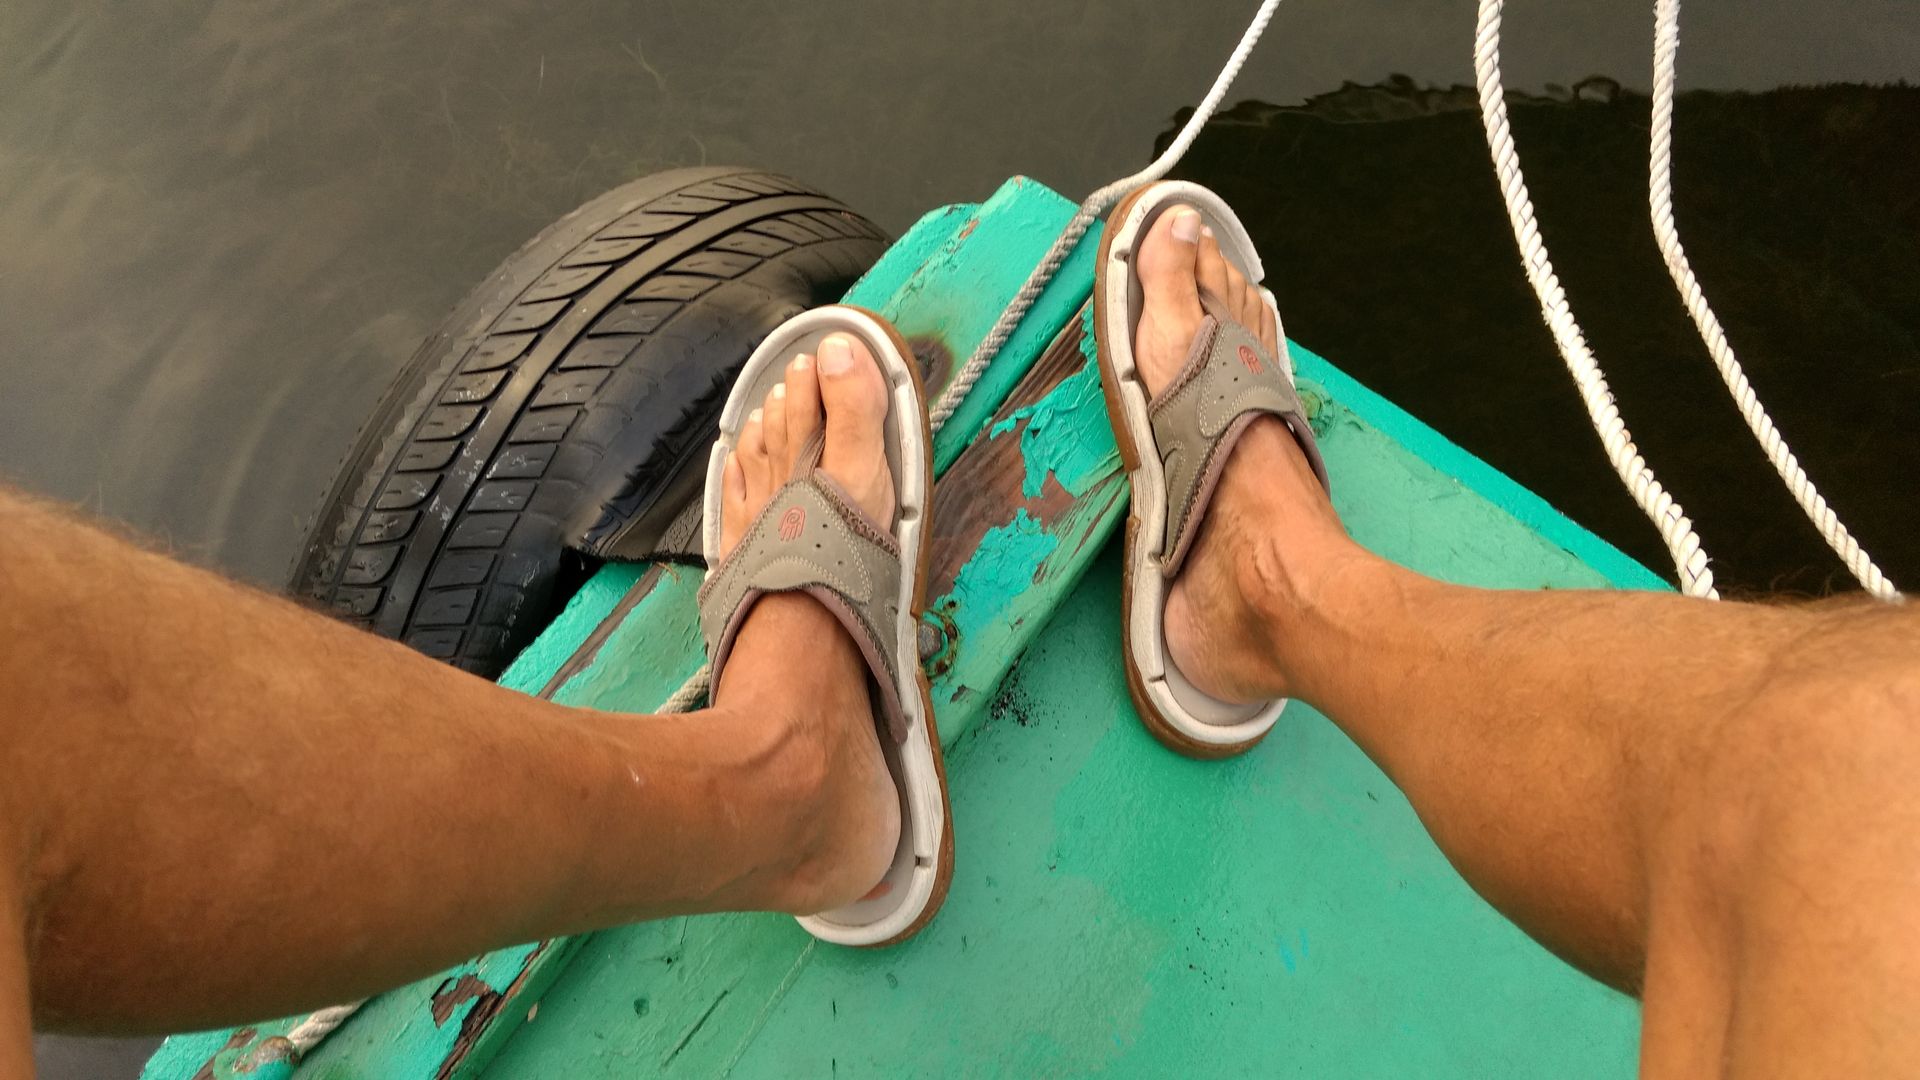 Sandals on the dock